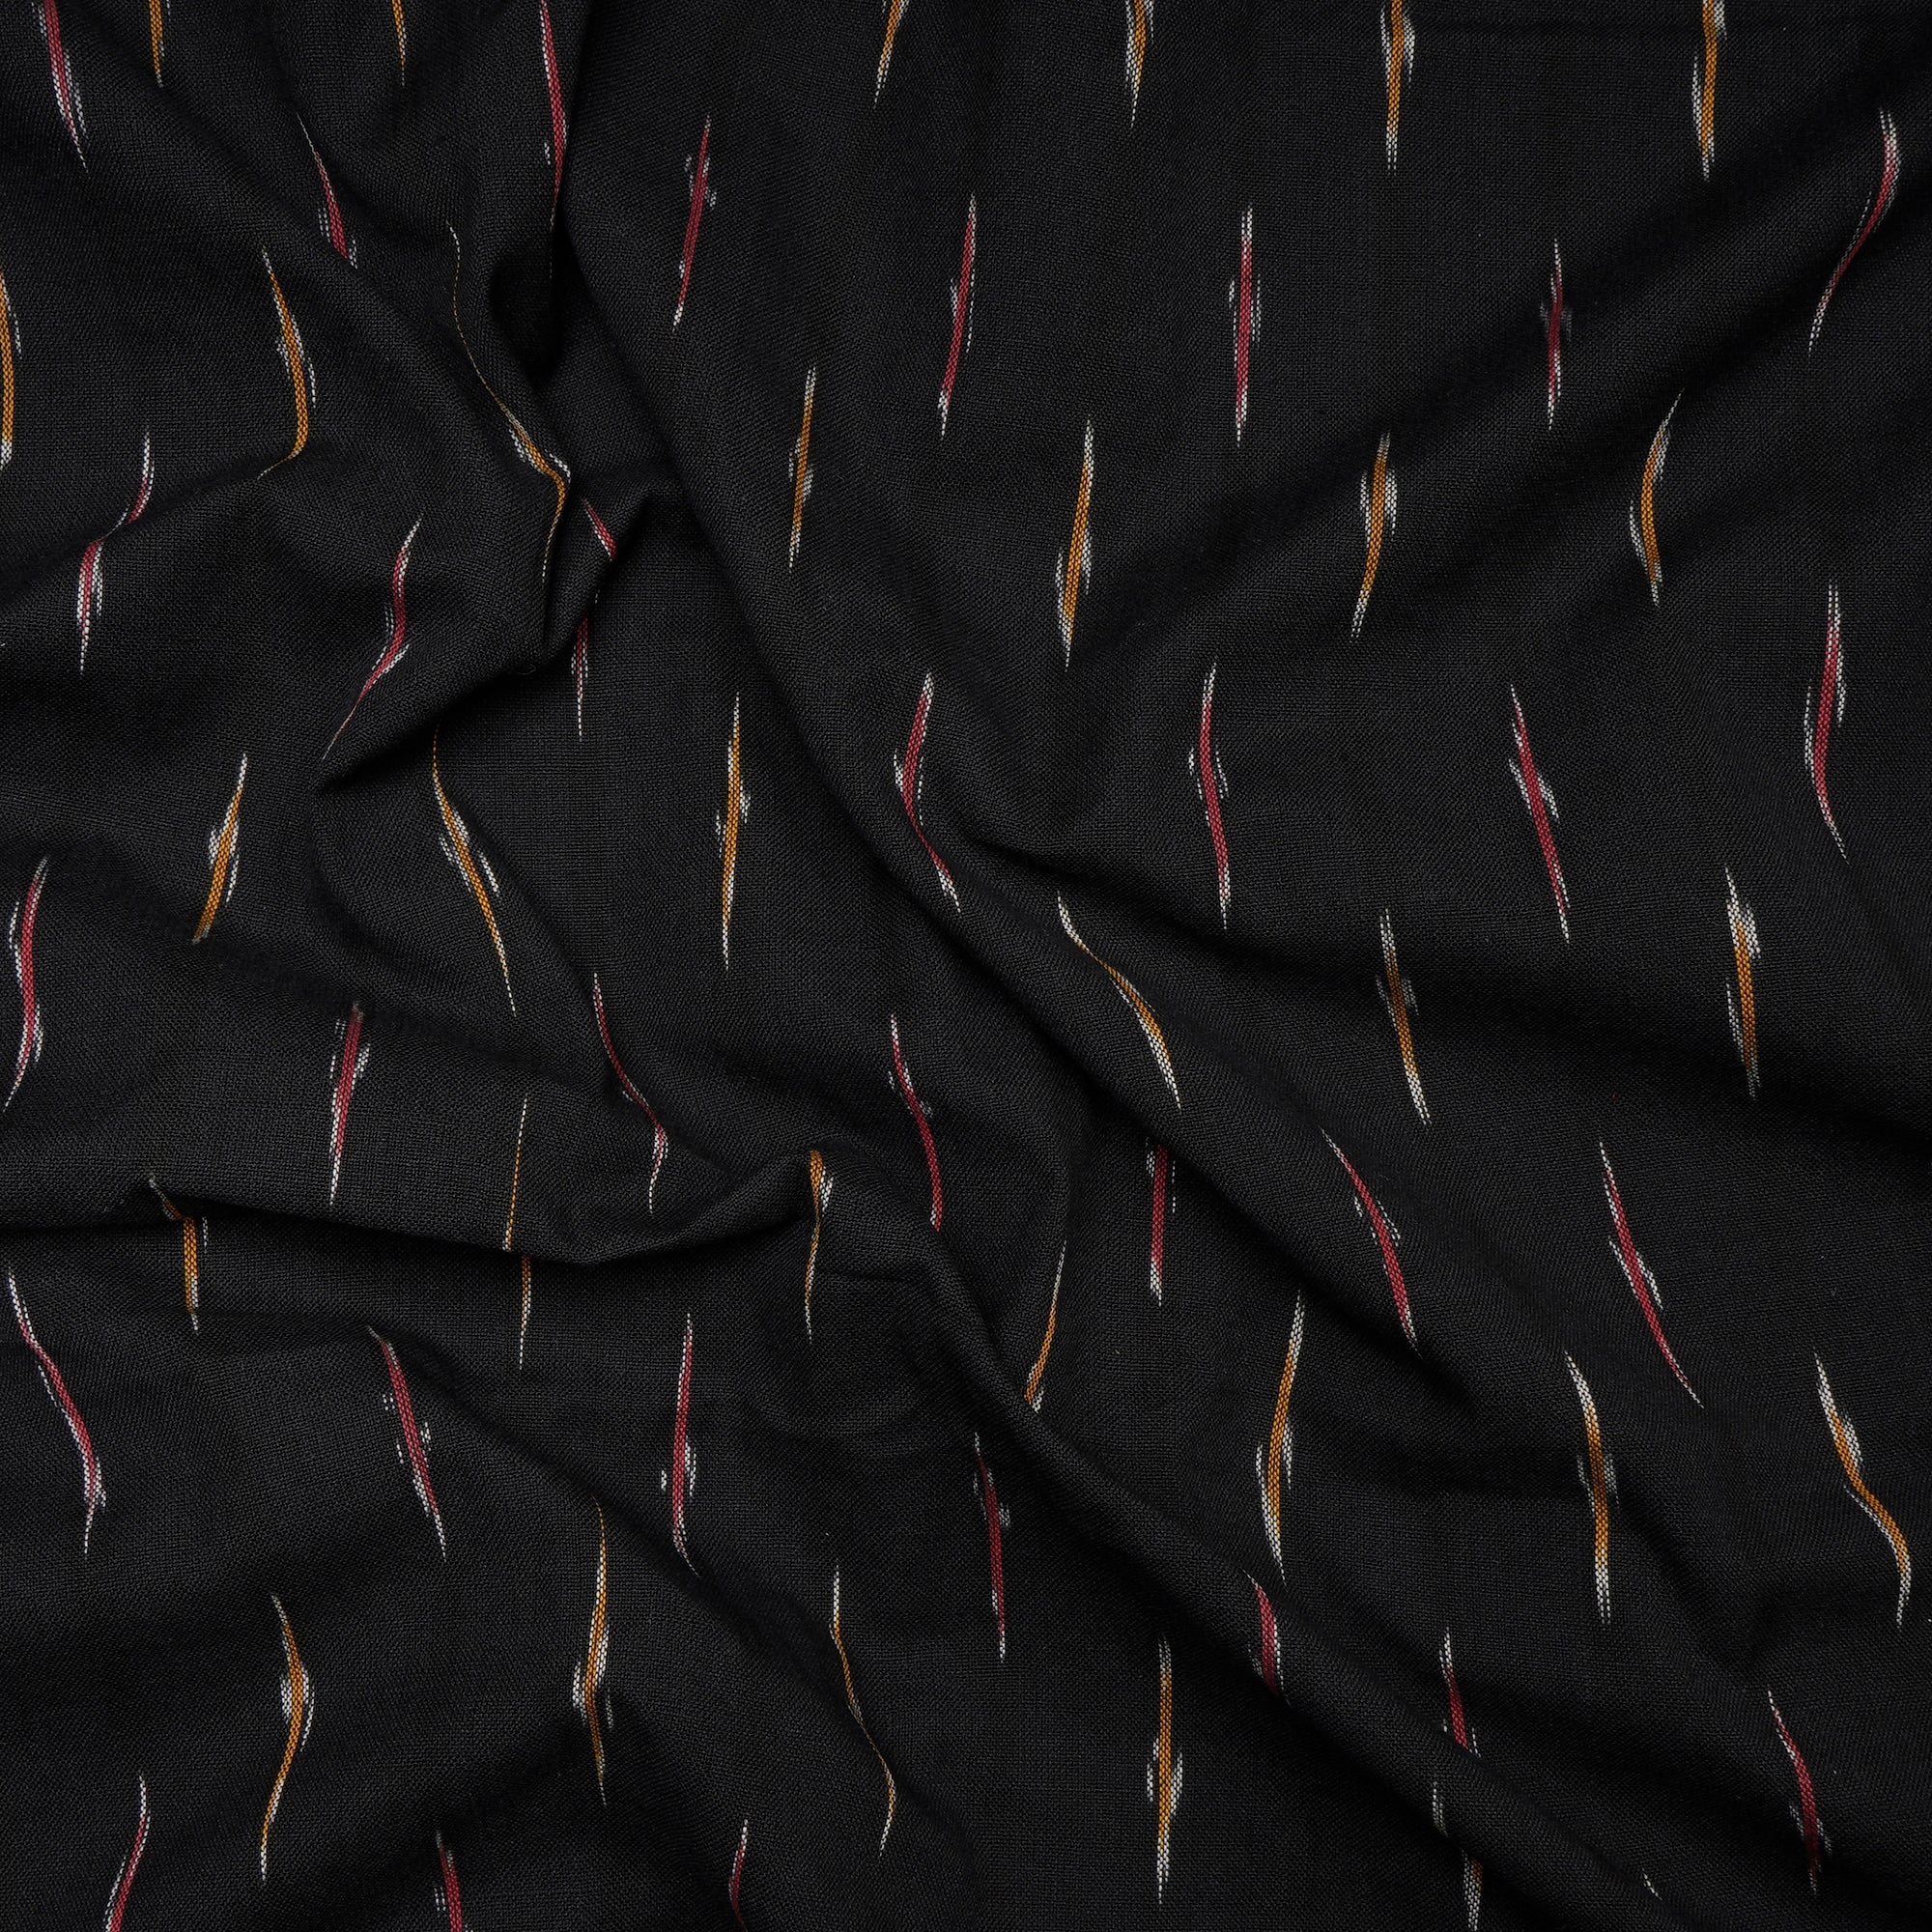 Black Washed Woven Ikat Cotton Fabric